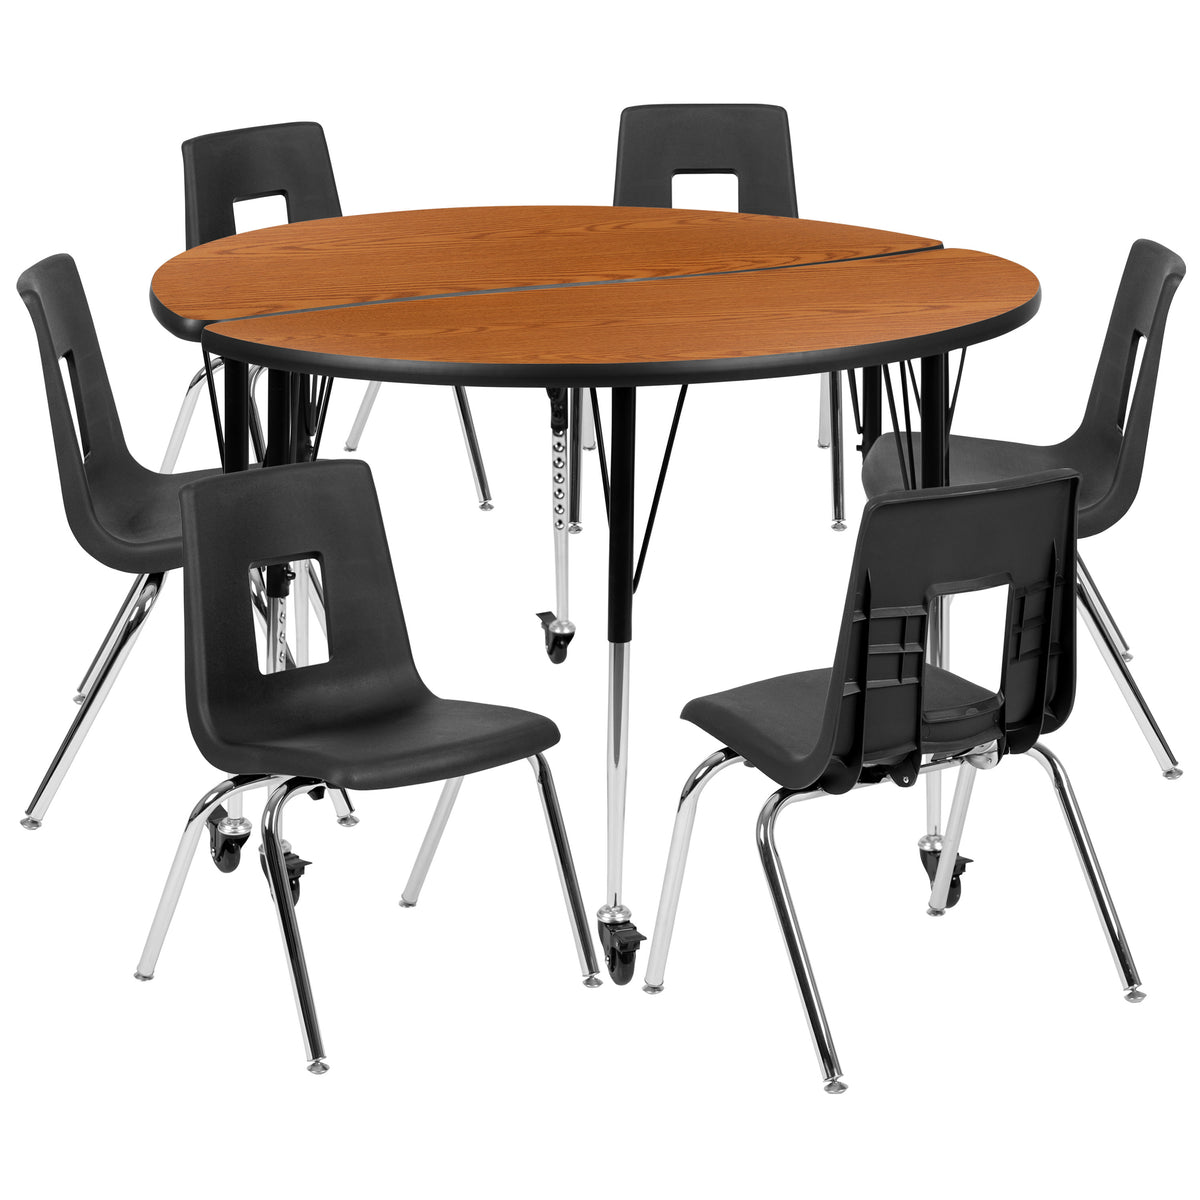 Oak |#| Mobile 47.5inch Circle Wave Activity Table Set-18inch Student Stack Chairs, Oak/Black